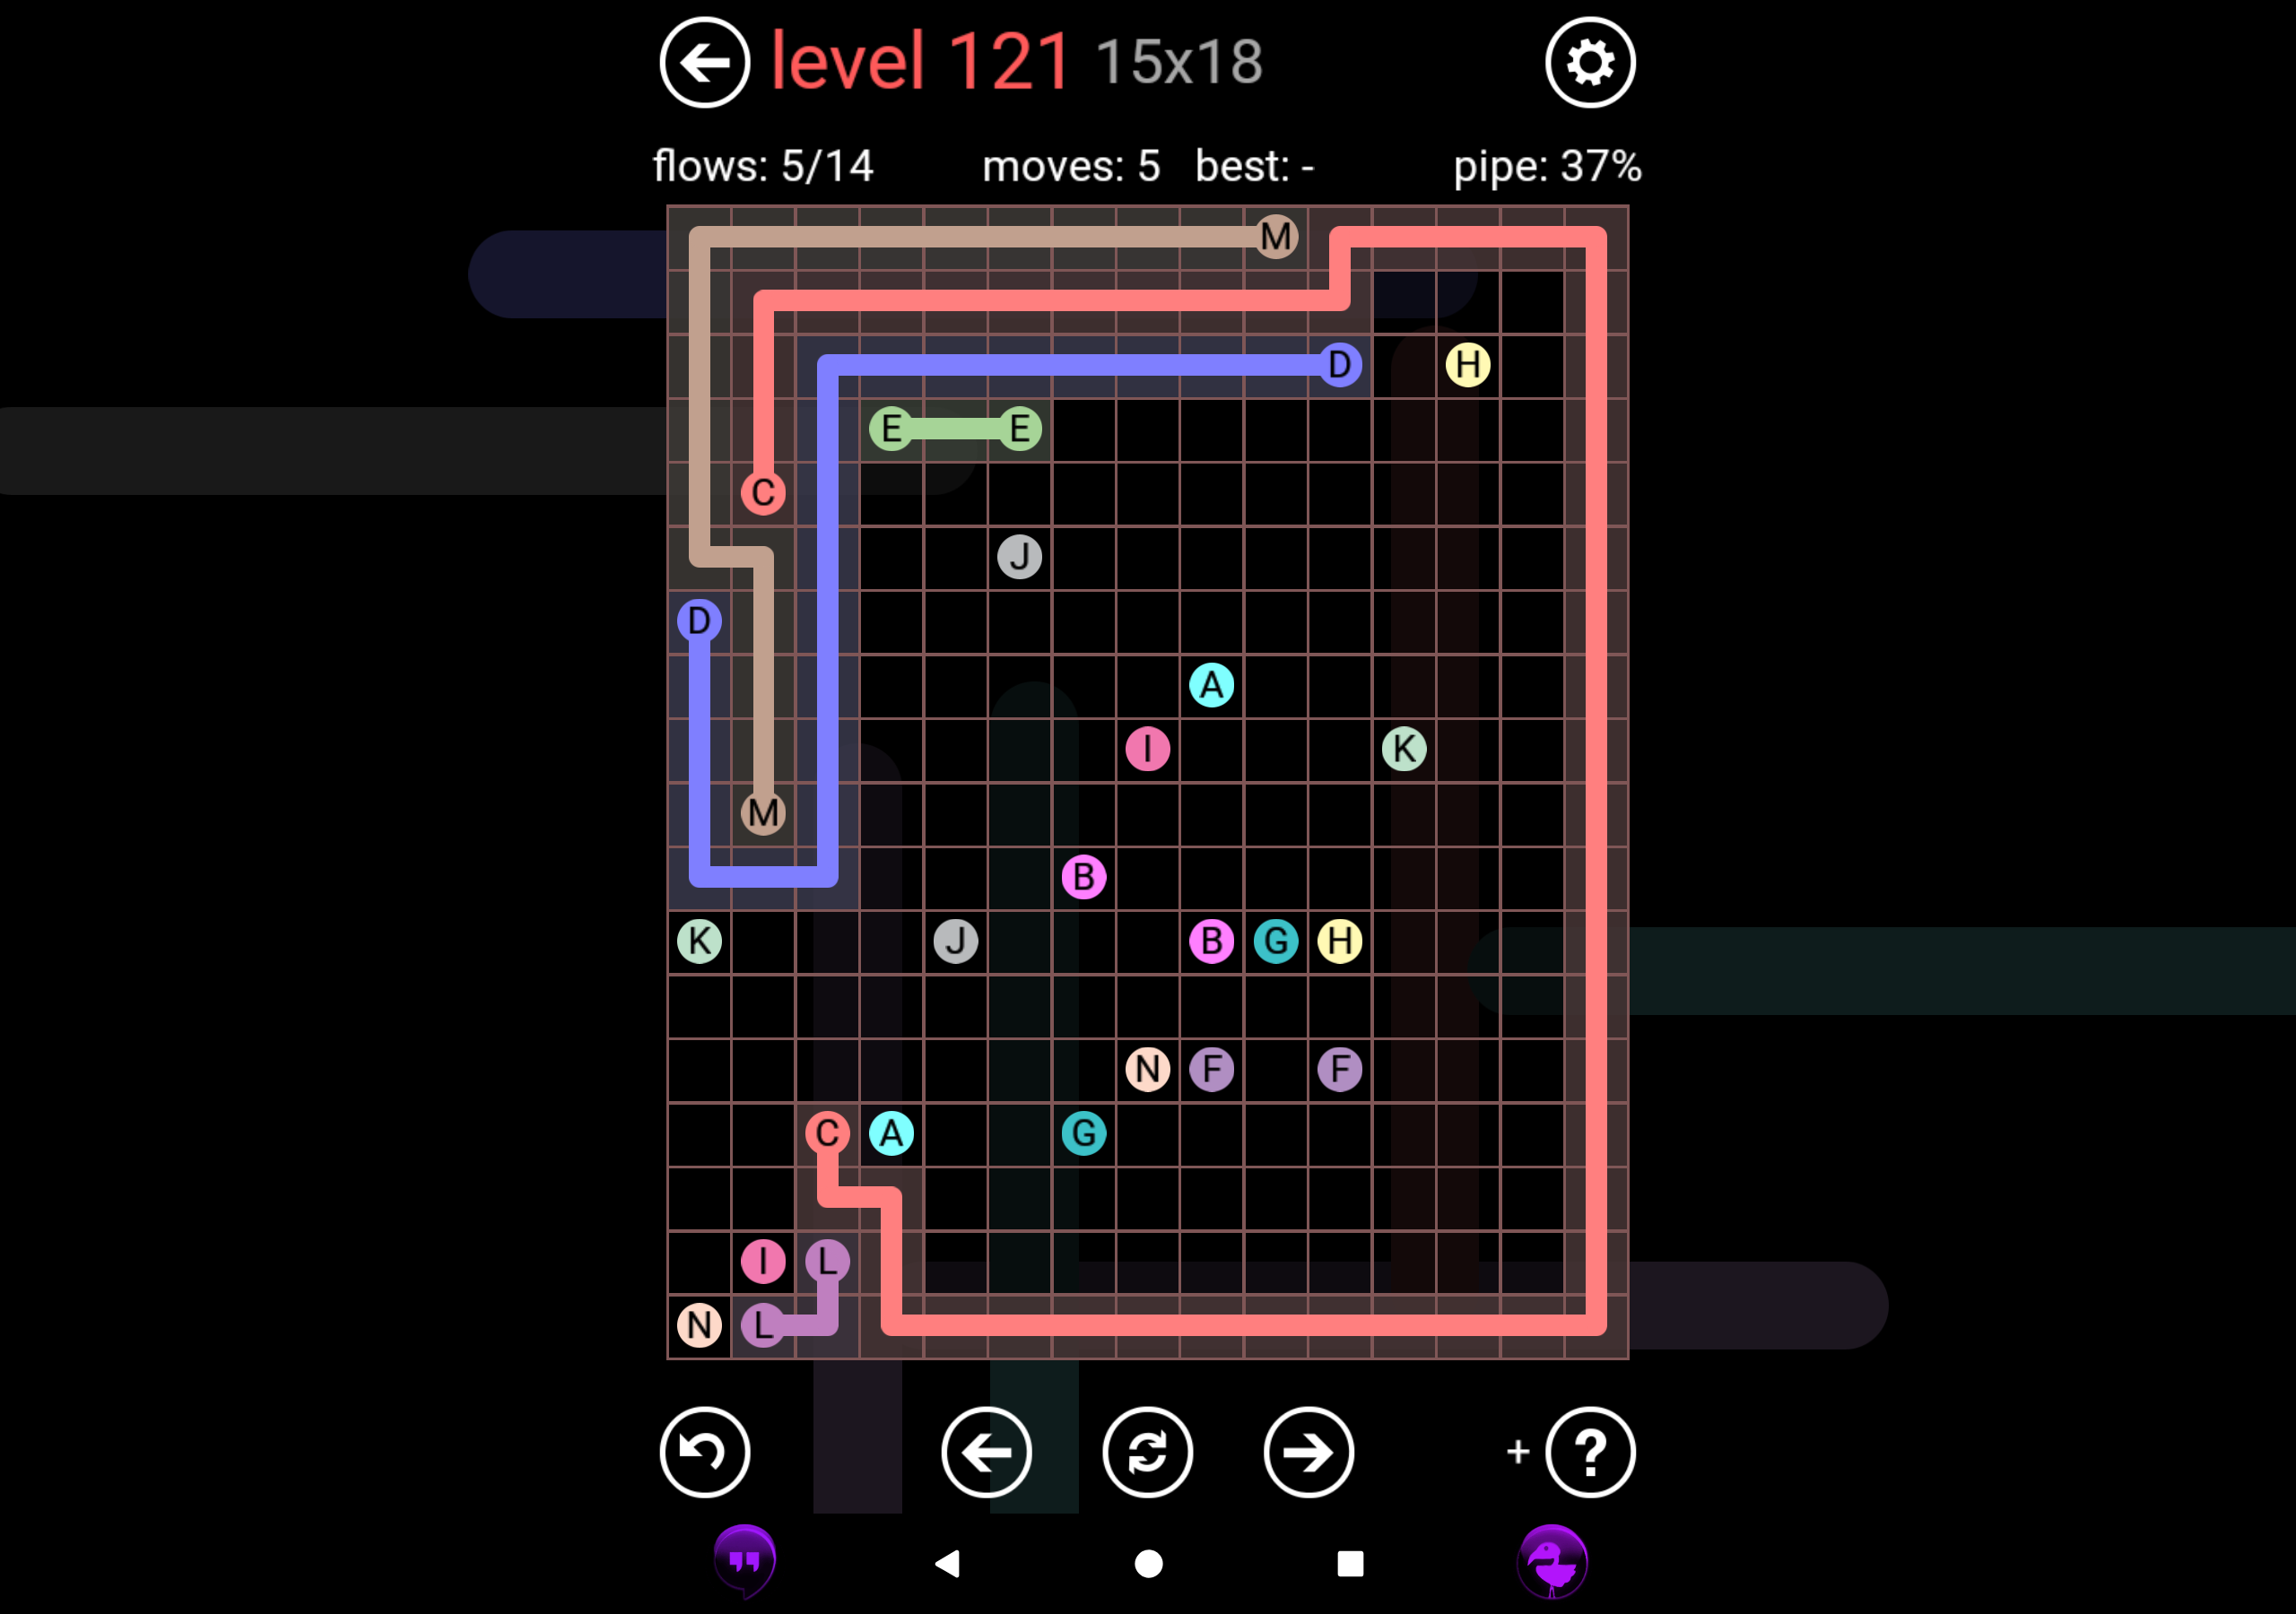 A screenshot of Flow Free, showing a grid with different coloured dots, some with lines connecting them